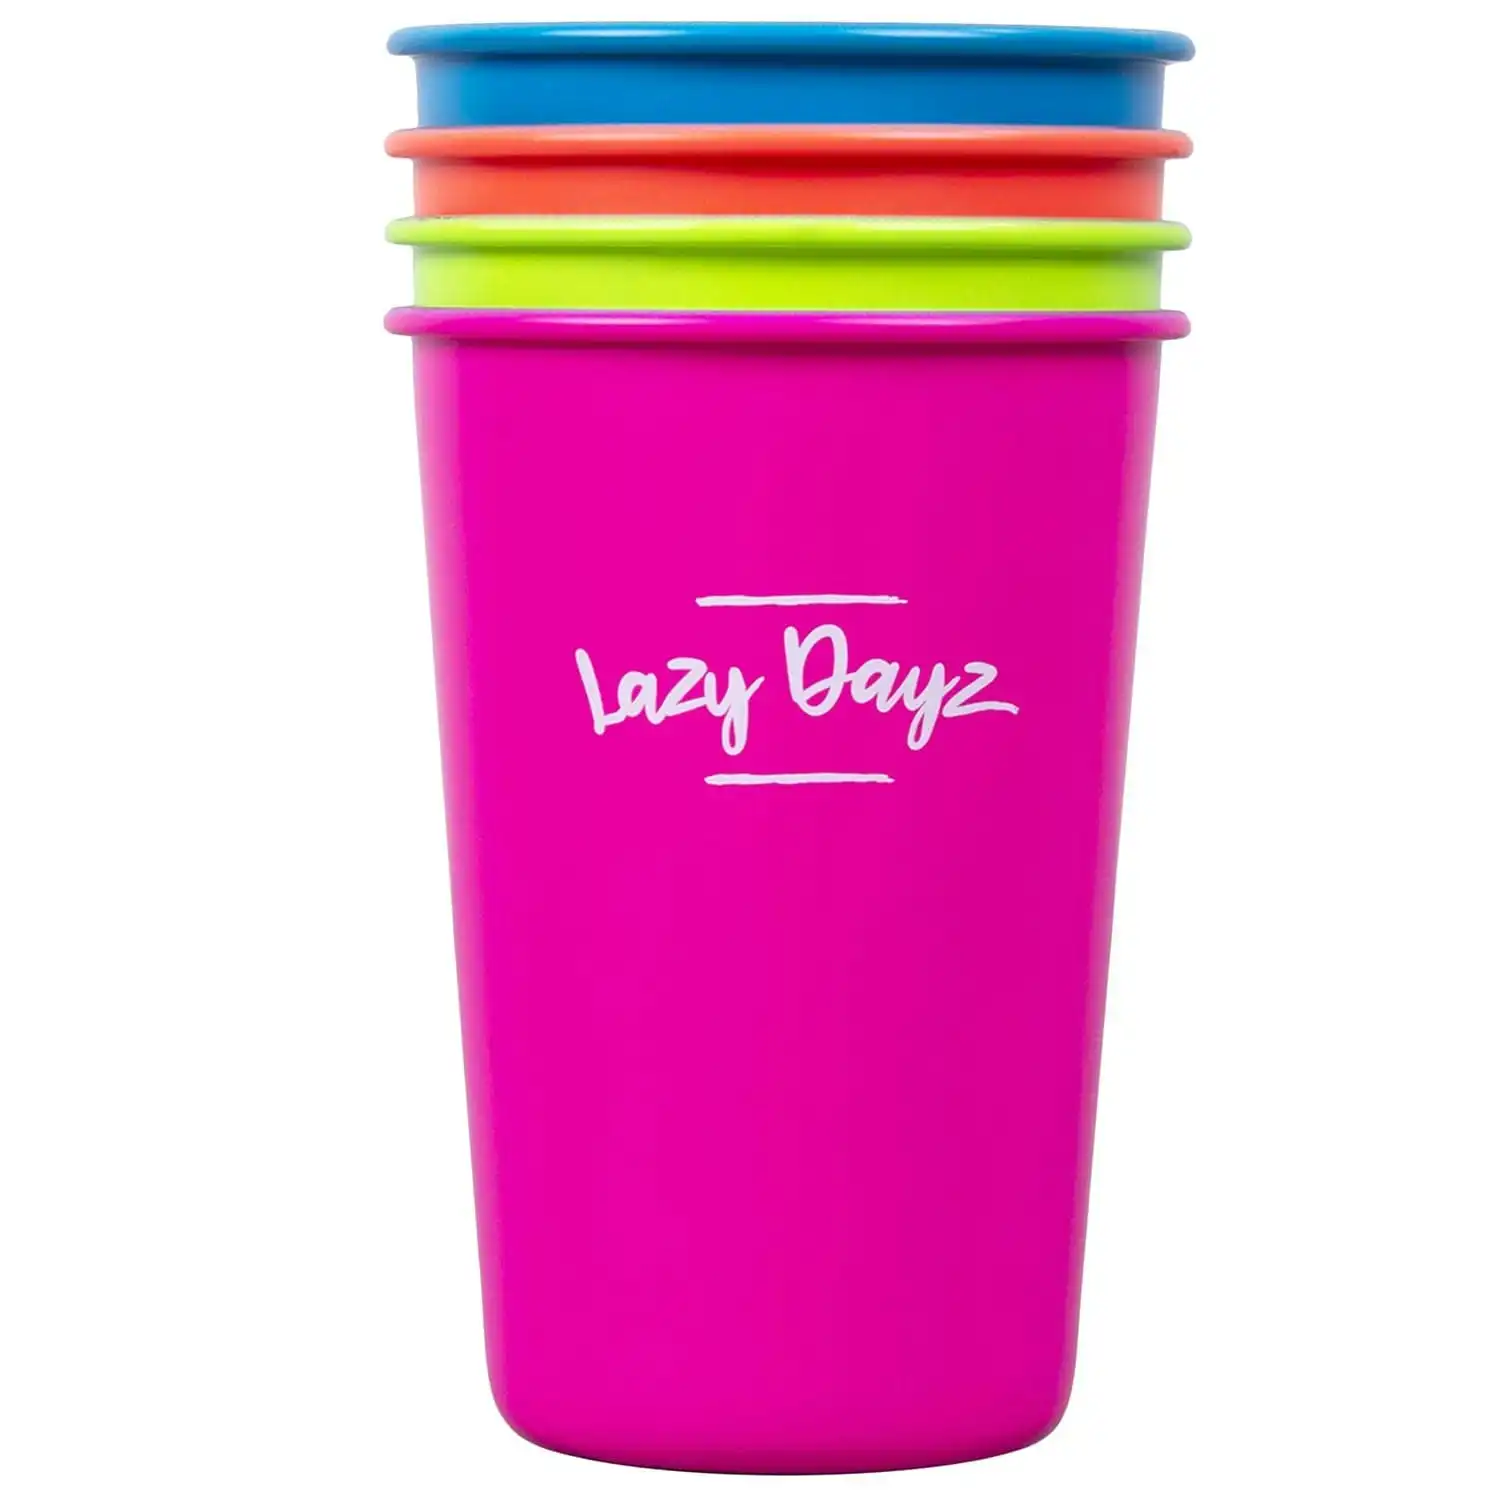 Lazy Dayz Picnic Cup 350ml 4 Pack